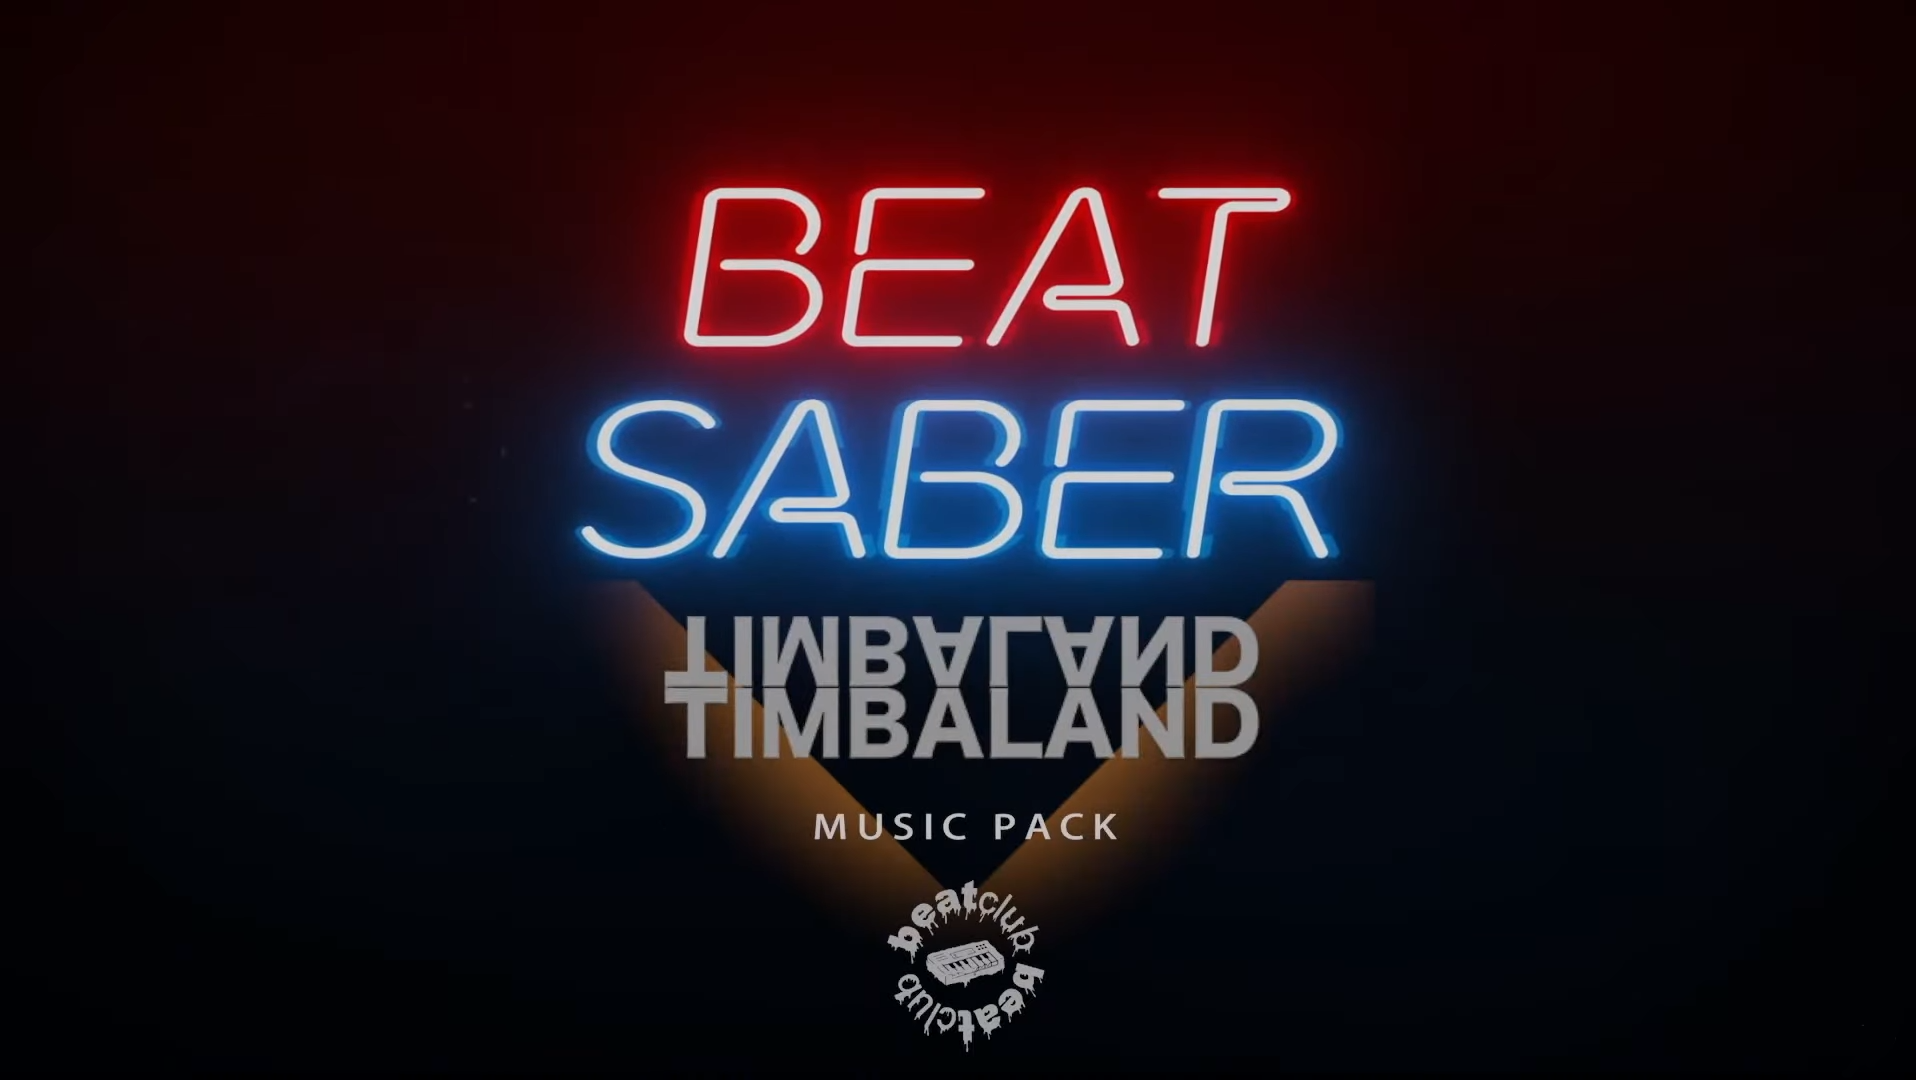 Timbaland has a new music pack for VR game Beat Saber